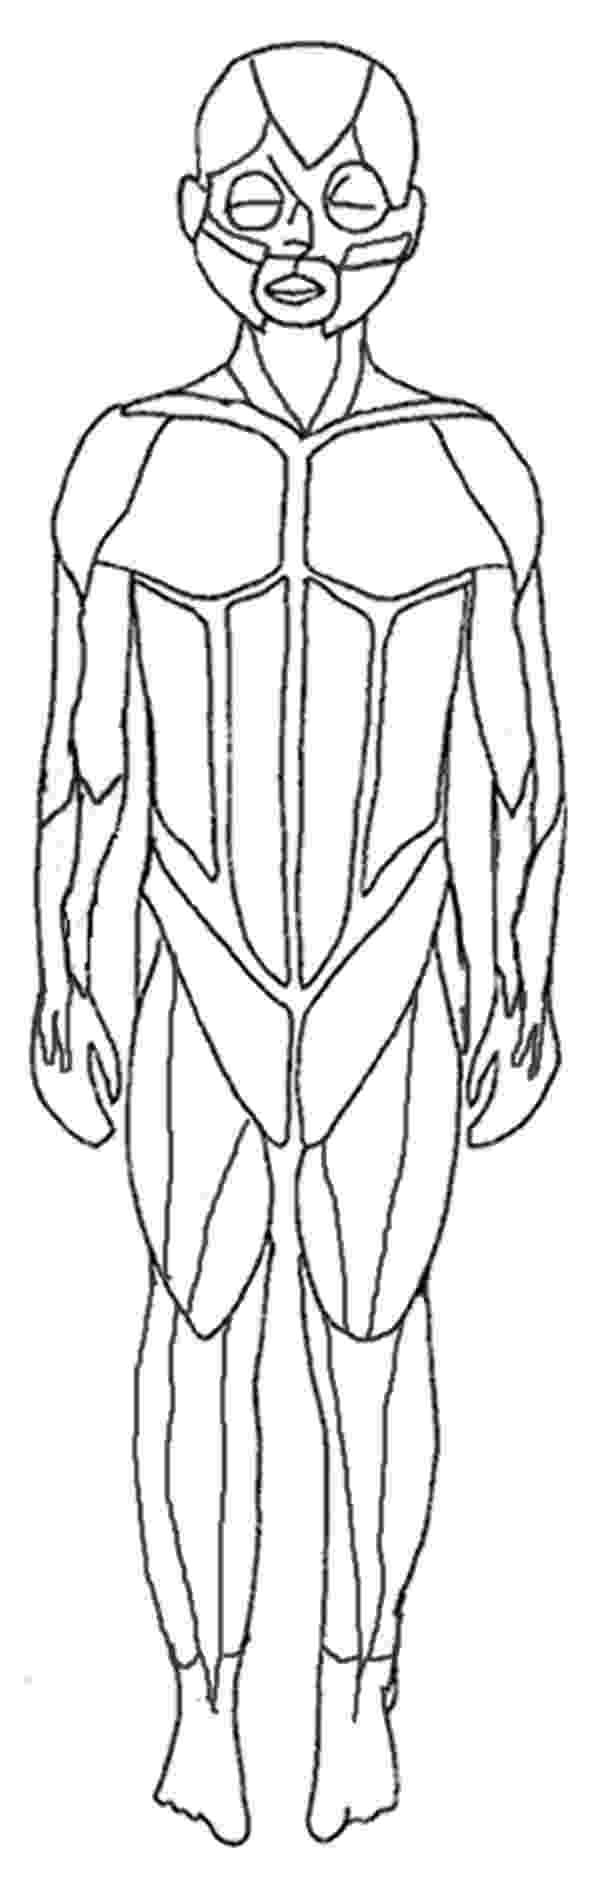 human muscle coloring human muscles front view worksheet coloring page free human muscle coloring 